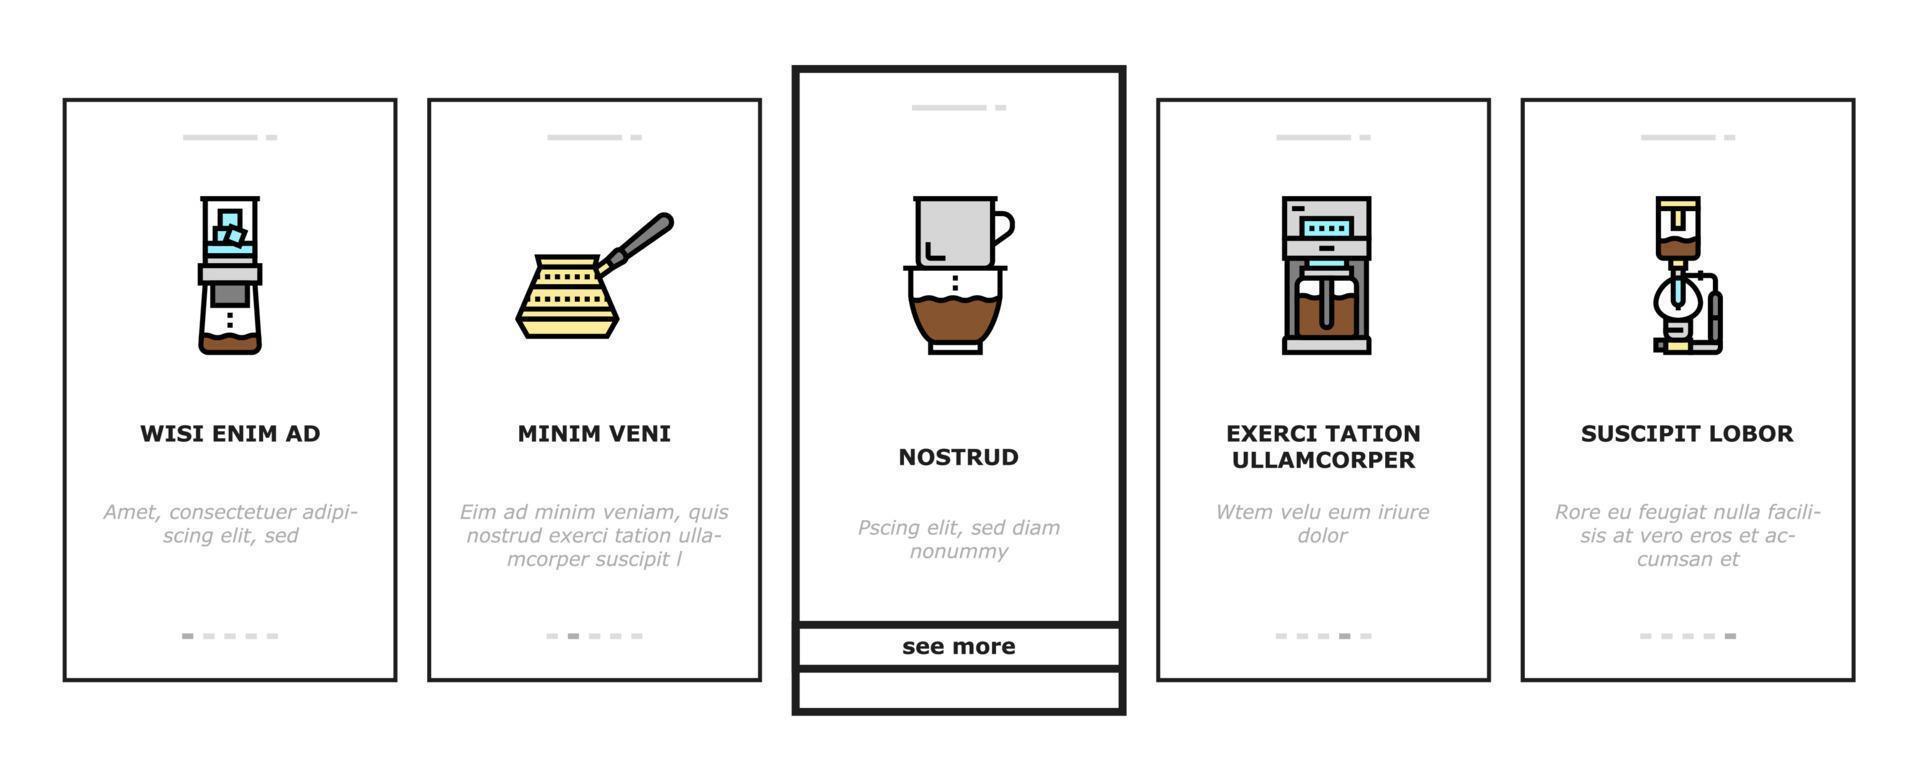 Coffee Make Machine And Accessory Onboarding Icons Set Vector